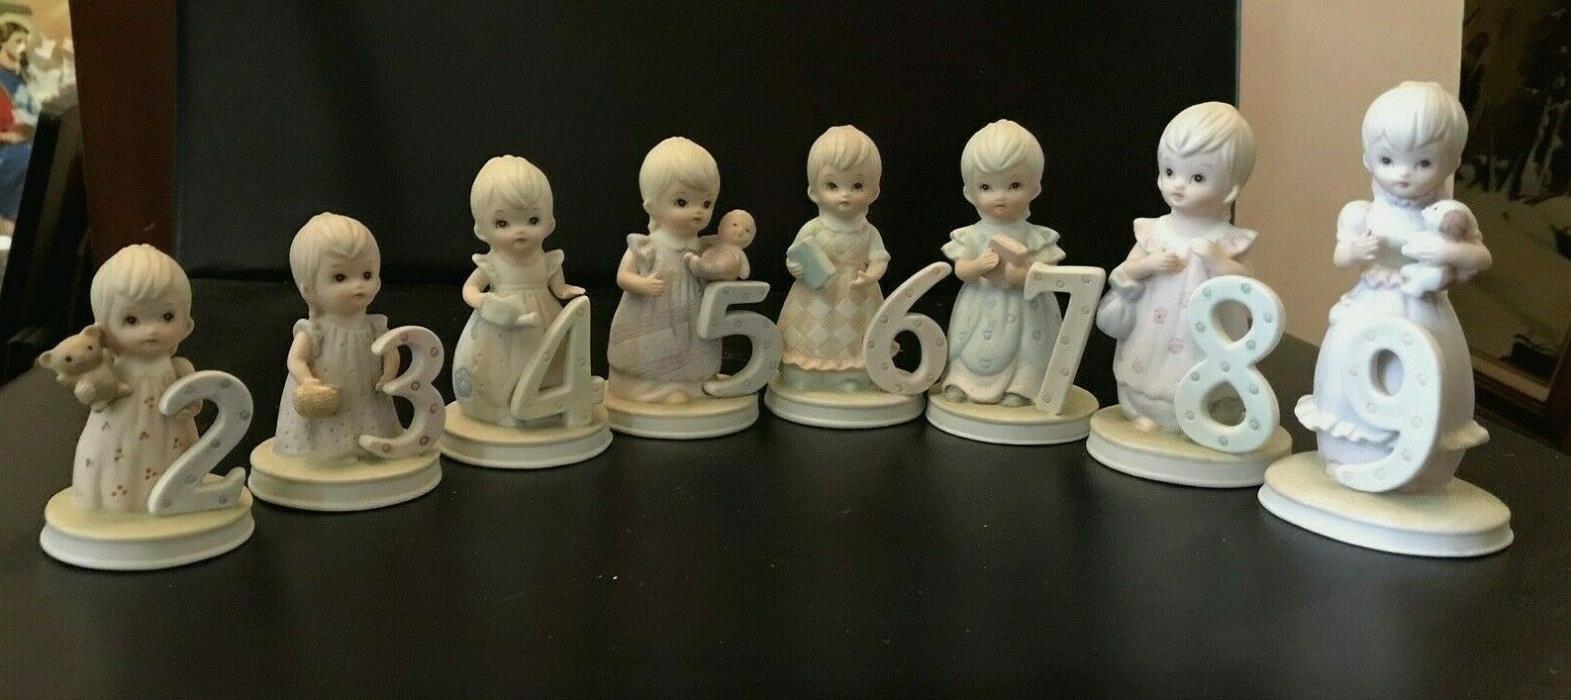 Christopher Collection Lefton Girls Birthday Figurines years 2 3 4 5 6 7 8 9